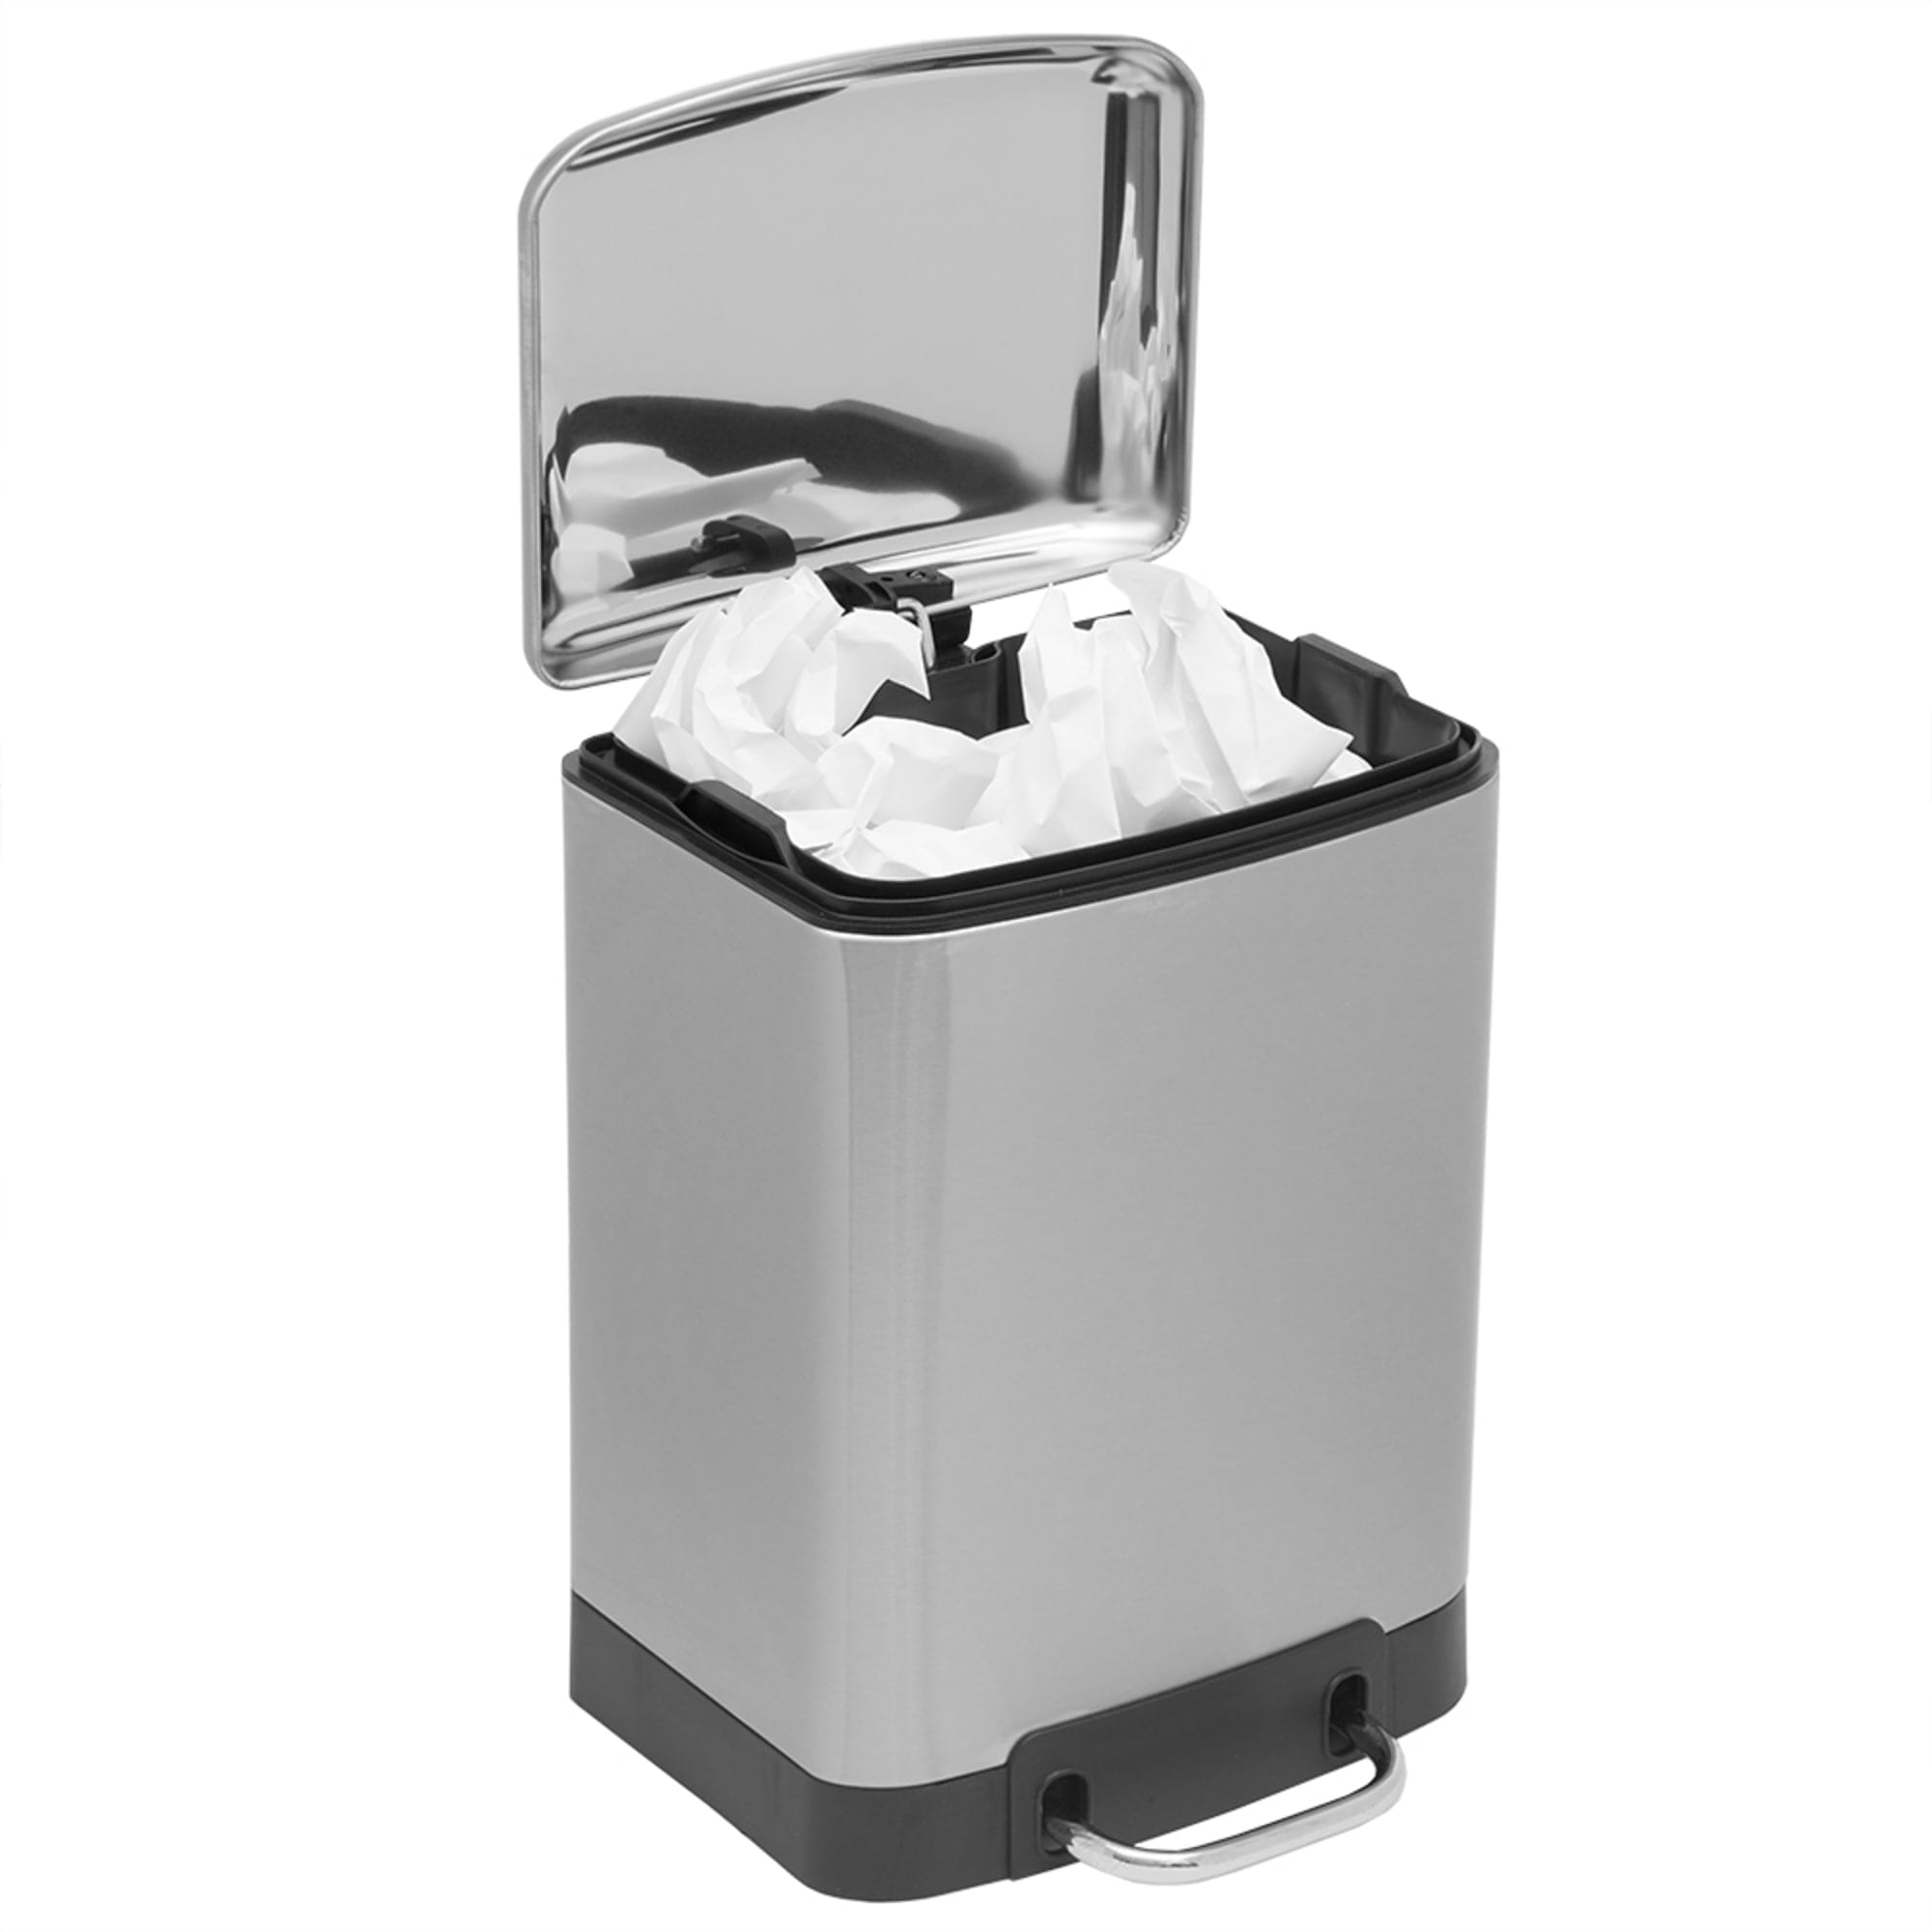 Michael Graves Design Soft Close 6 Liter Step On Stainless Steel Waste Bin, Silver $20.00 EACH, CASE PACK OF 4